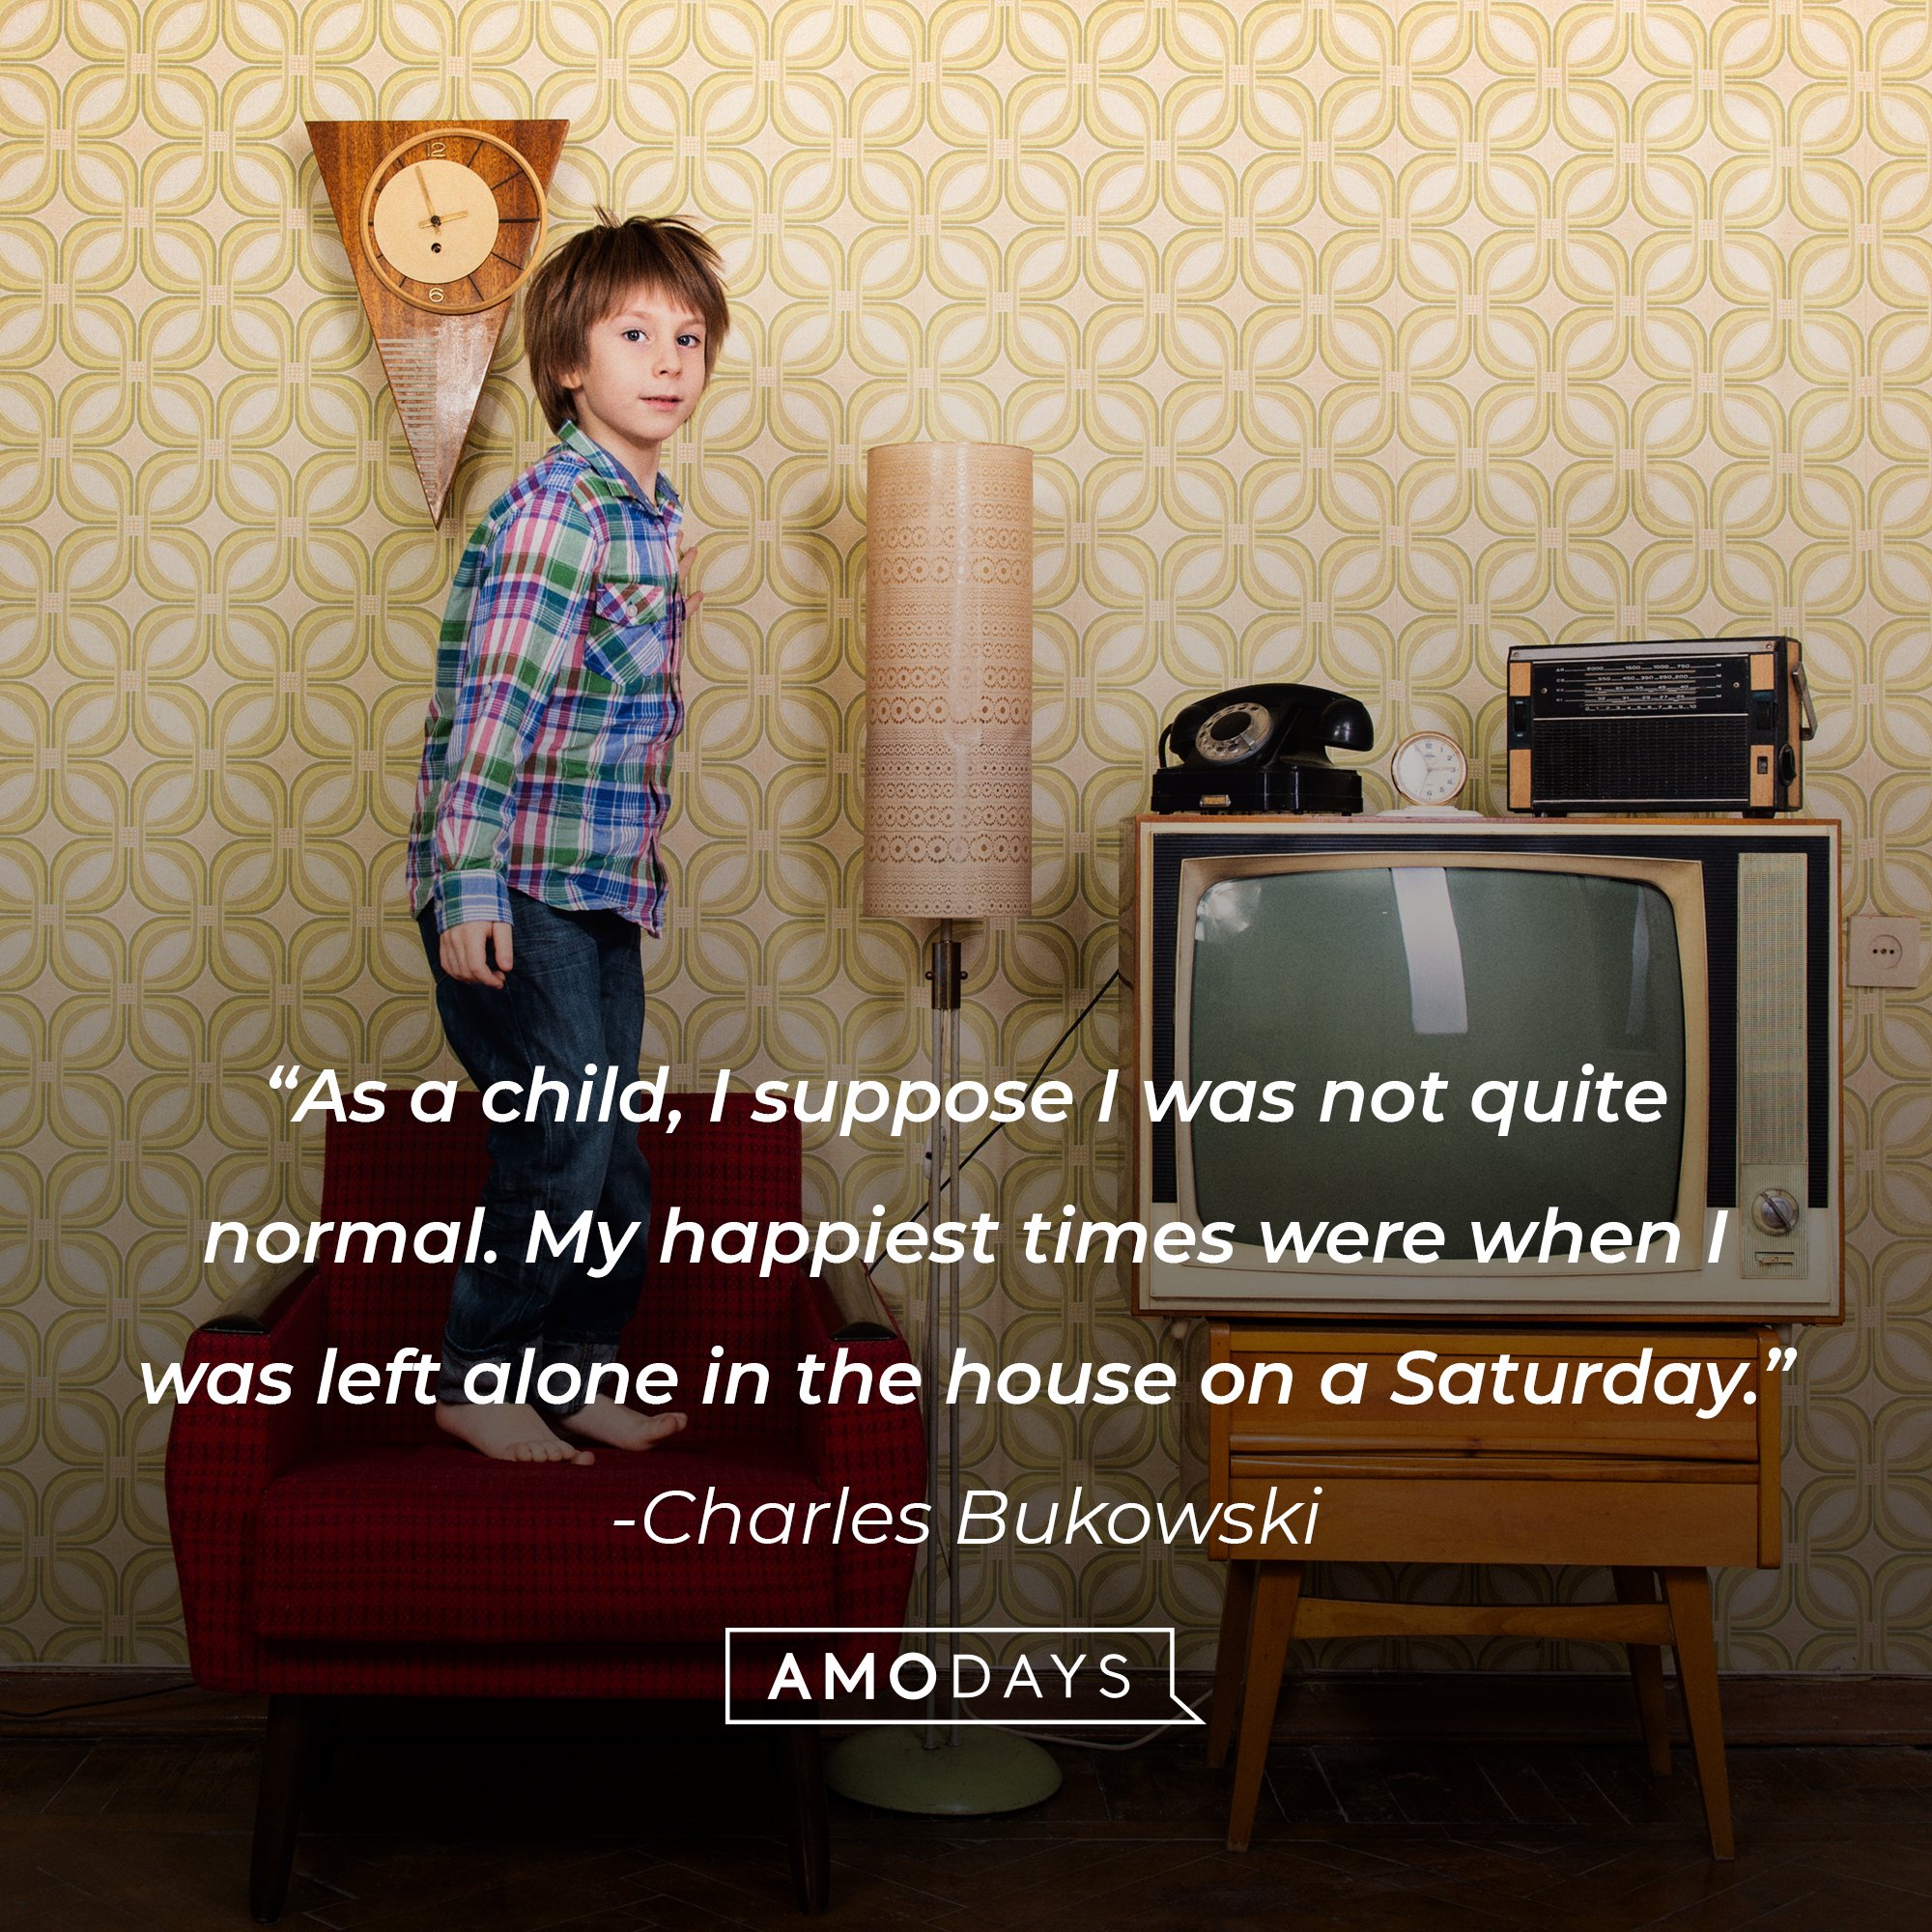  Charles Bukowski's quote: “As a child, I suppose I was not quite normal. My happiest times were when I was left alone in the house on a Saturday.”| Image: AmoDays